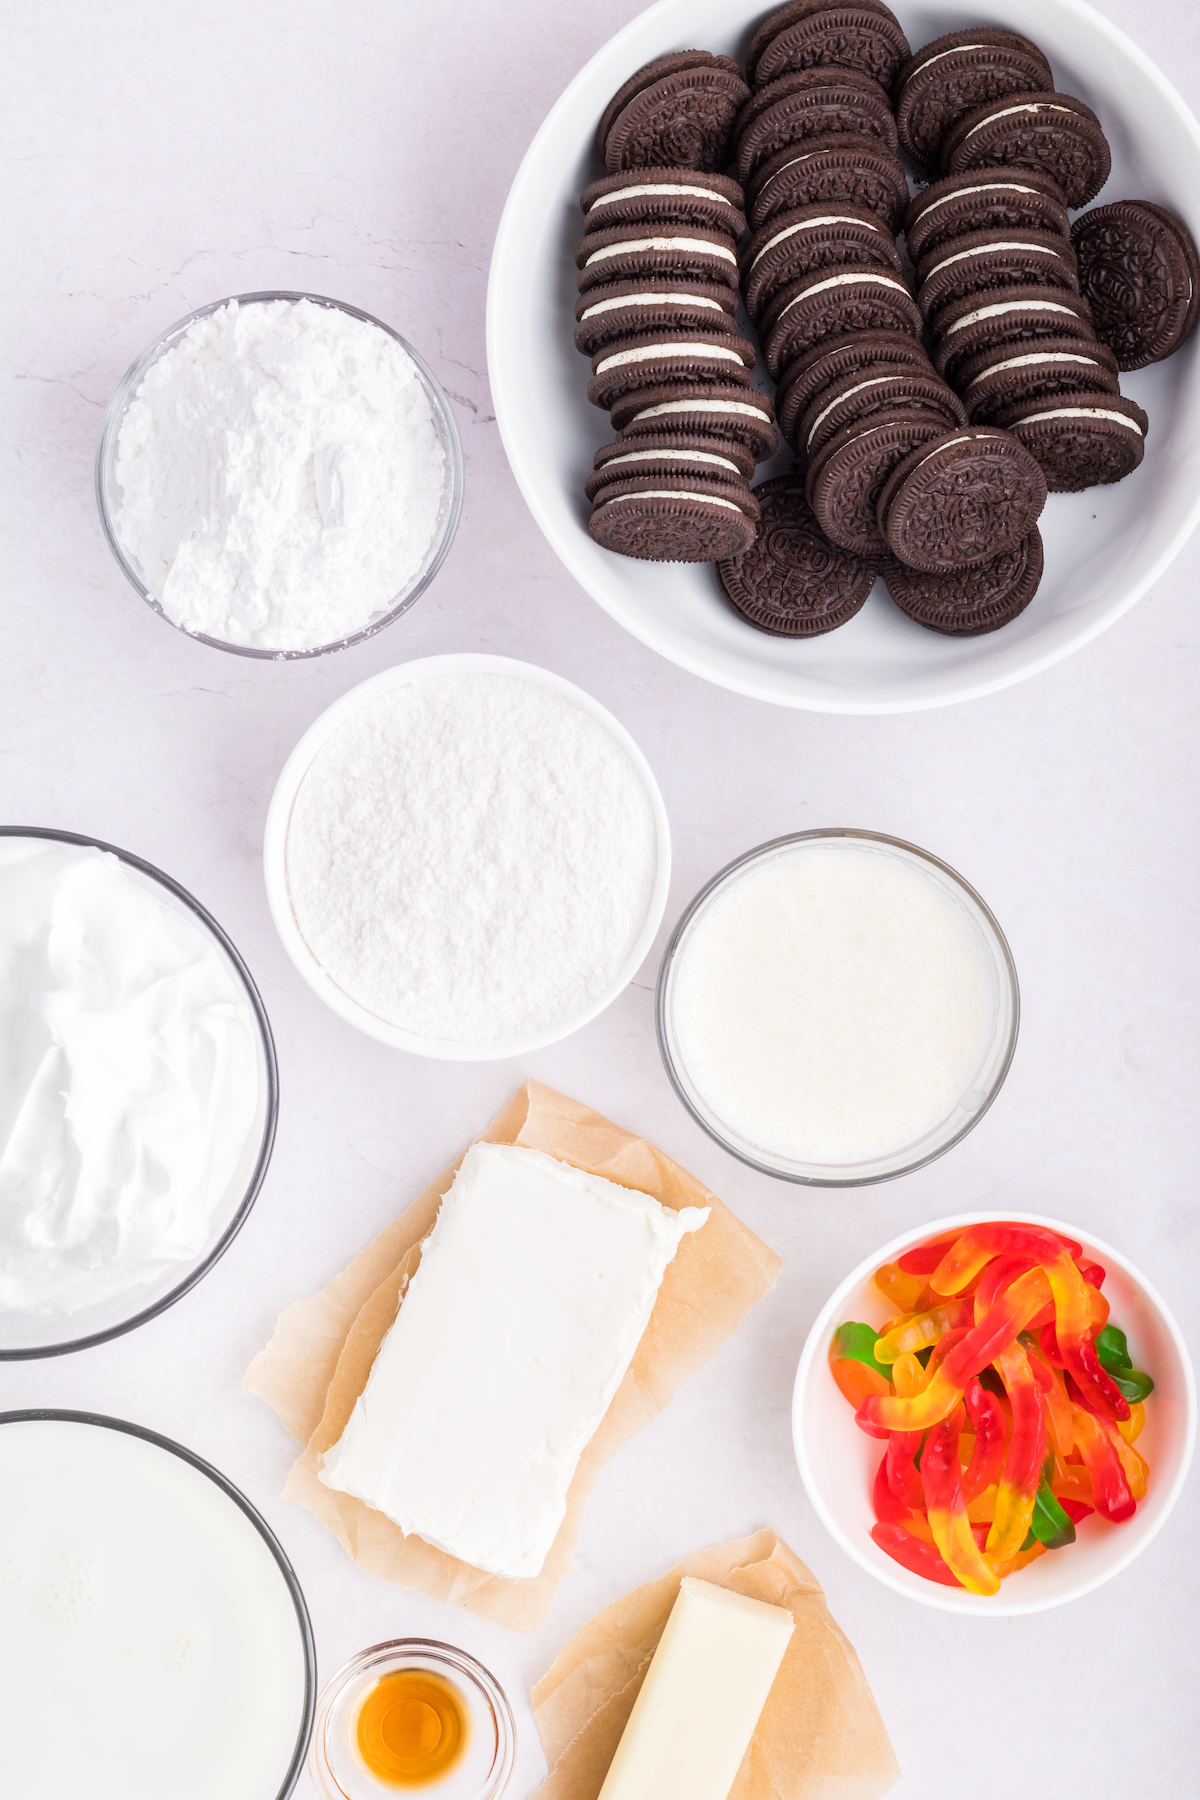 All the ingredients needed to make Oreo dirt cake arranged in glass prep bowls.